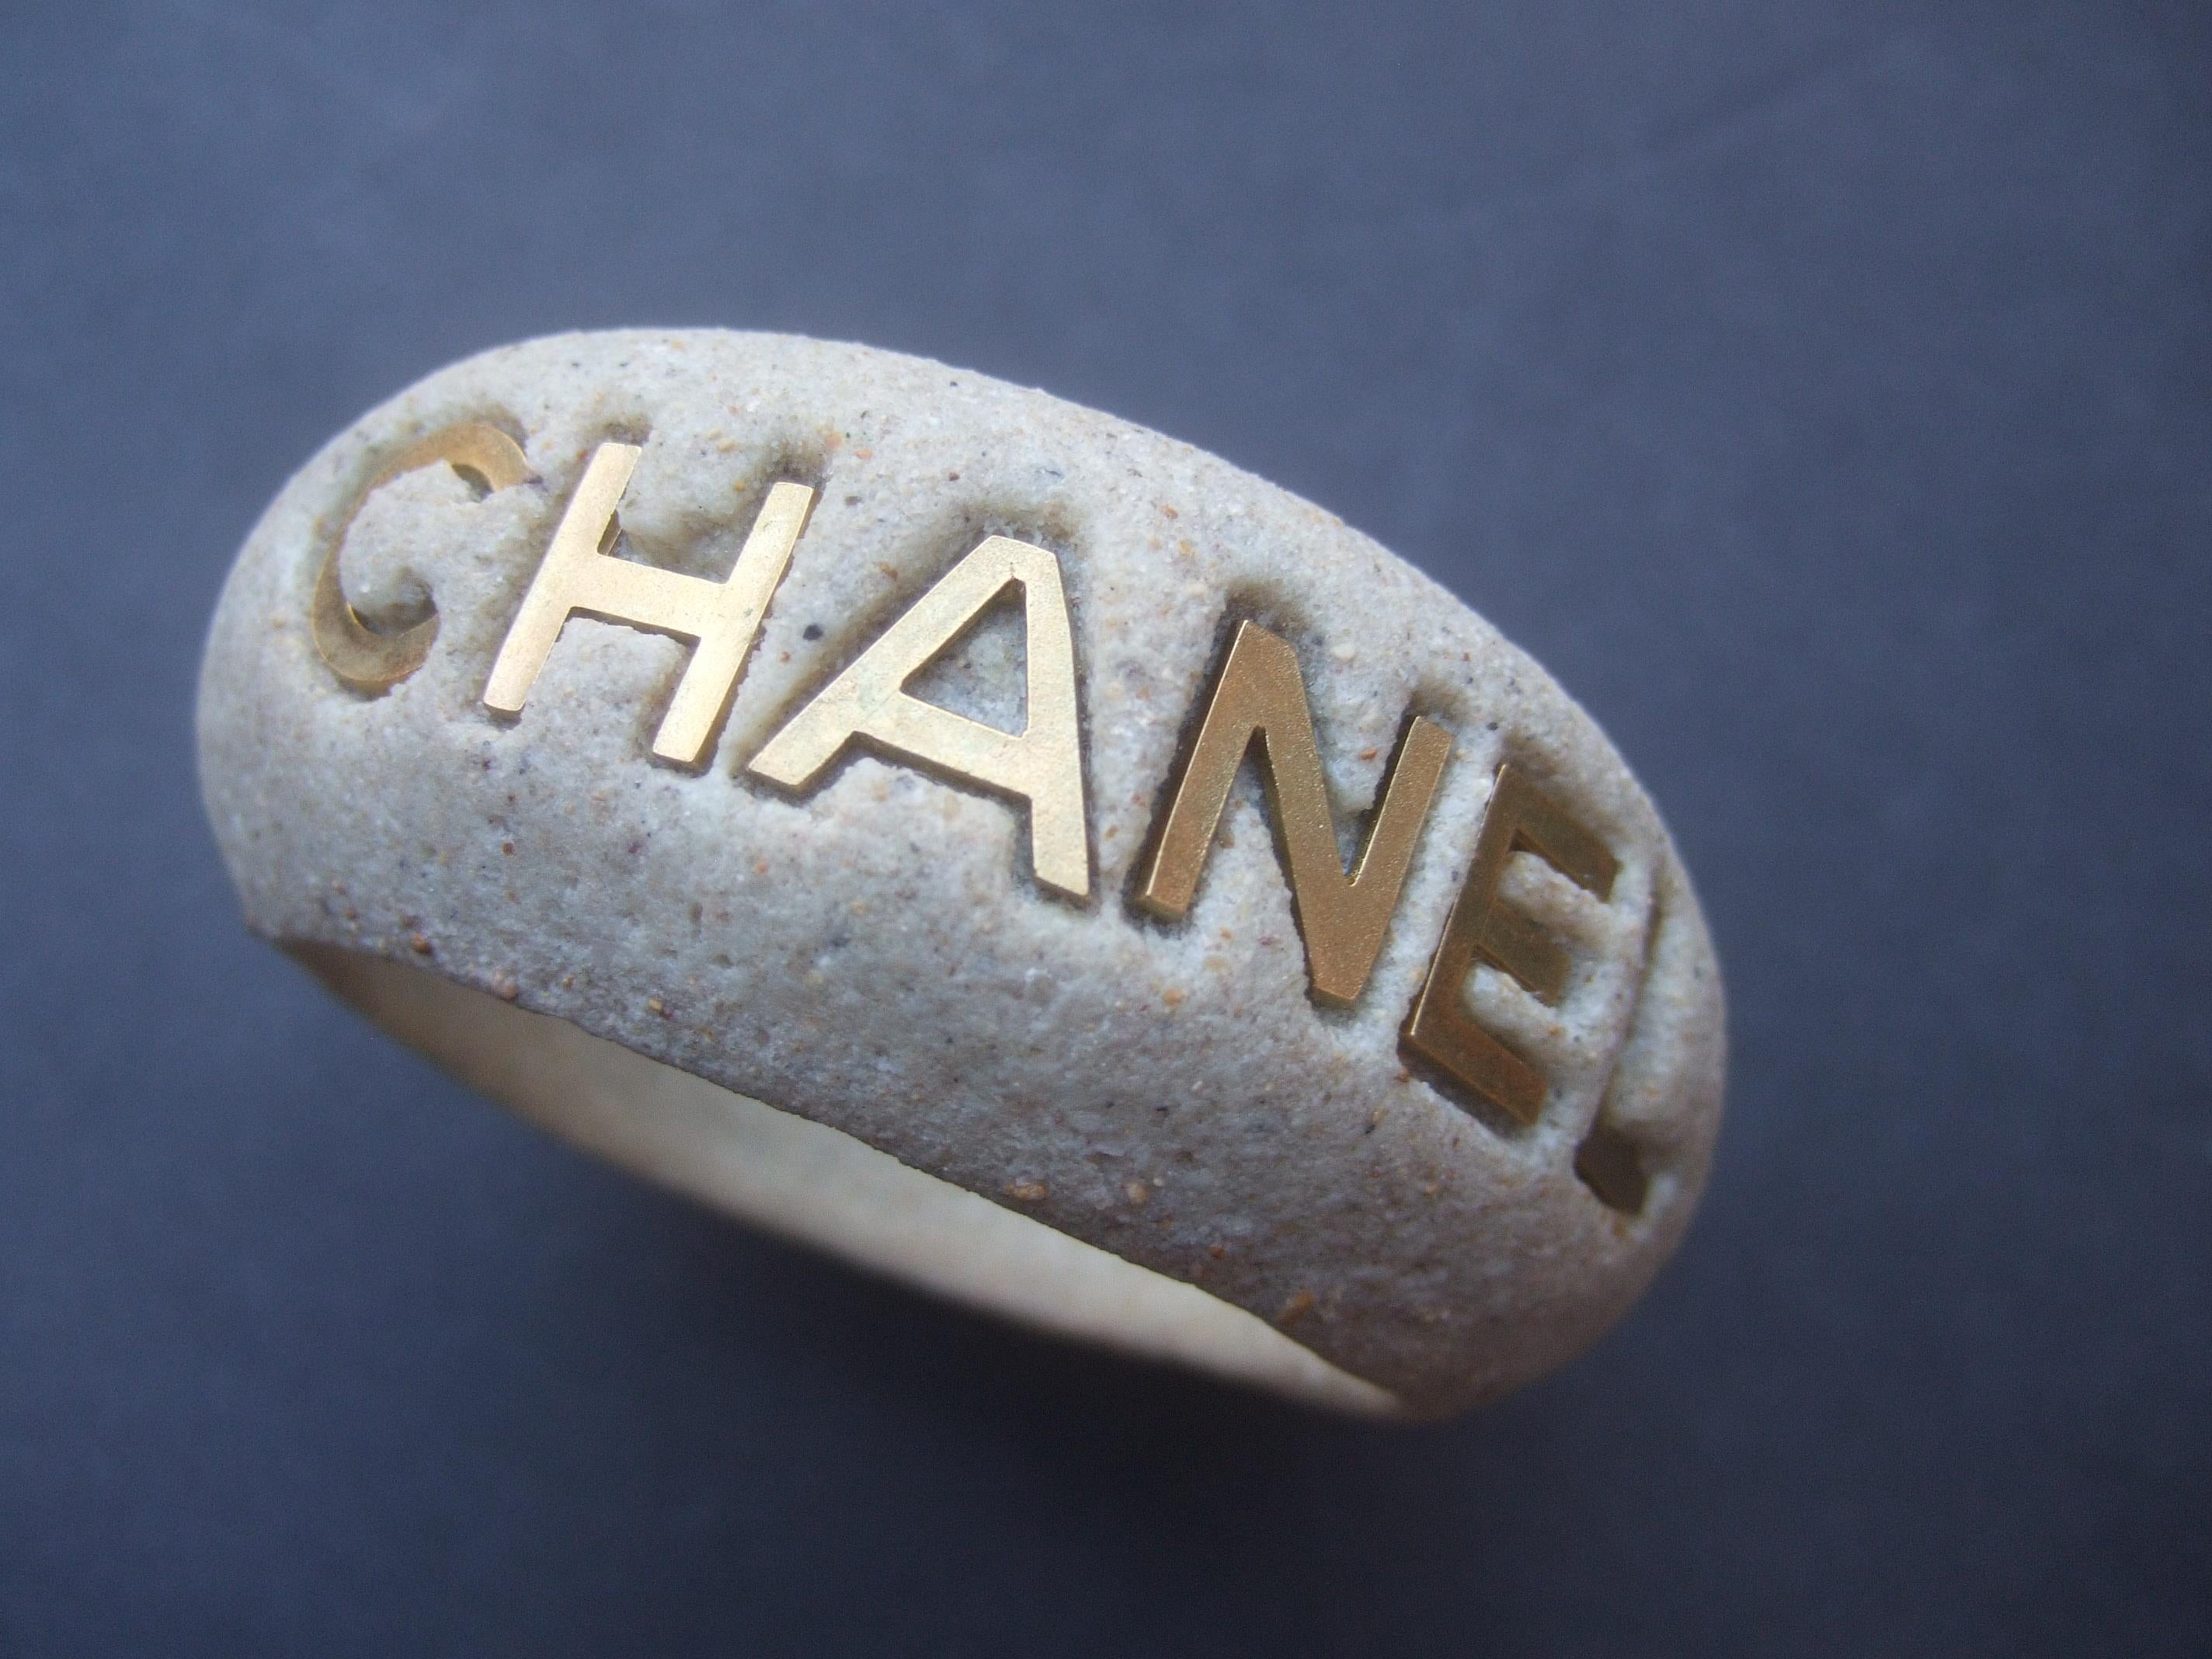 Chanel Wide Molded Bisque Stone Cuff Bracelet in Chanel Presentation Box c 1990s For Sale 1